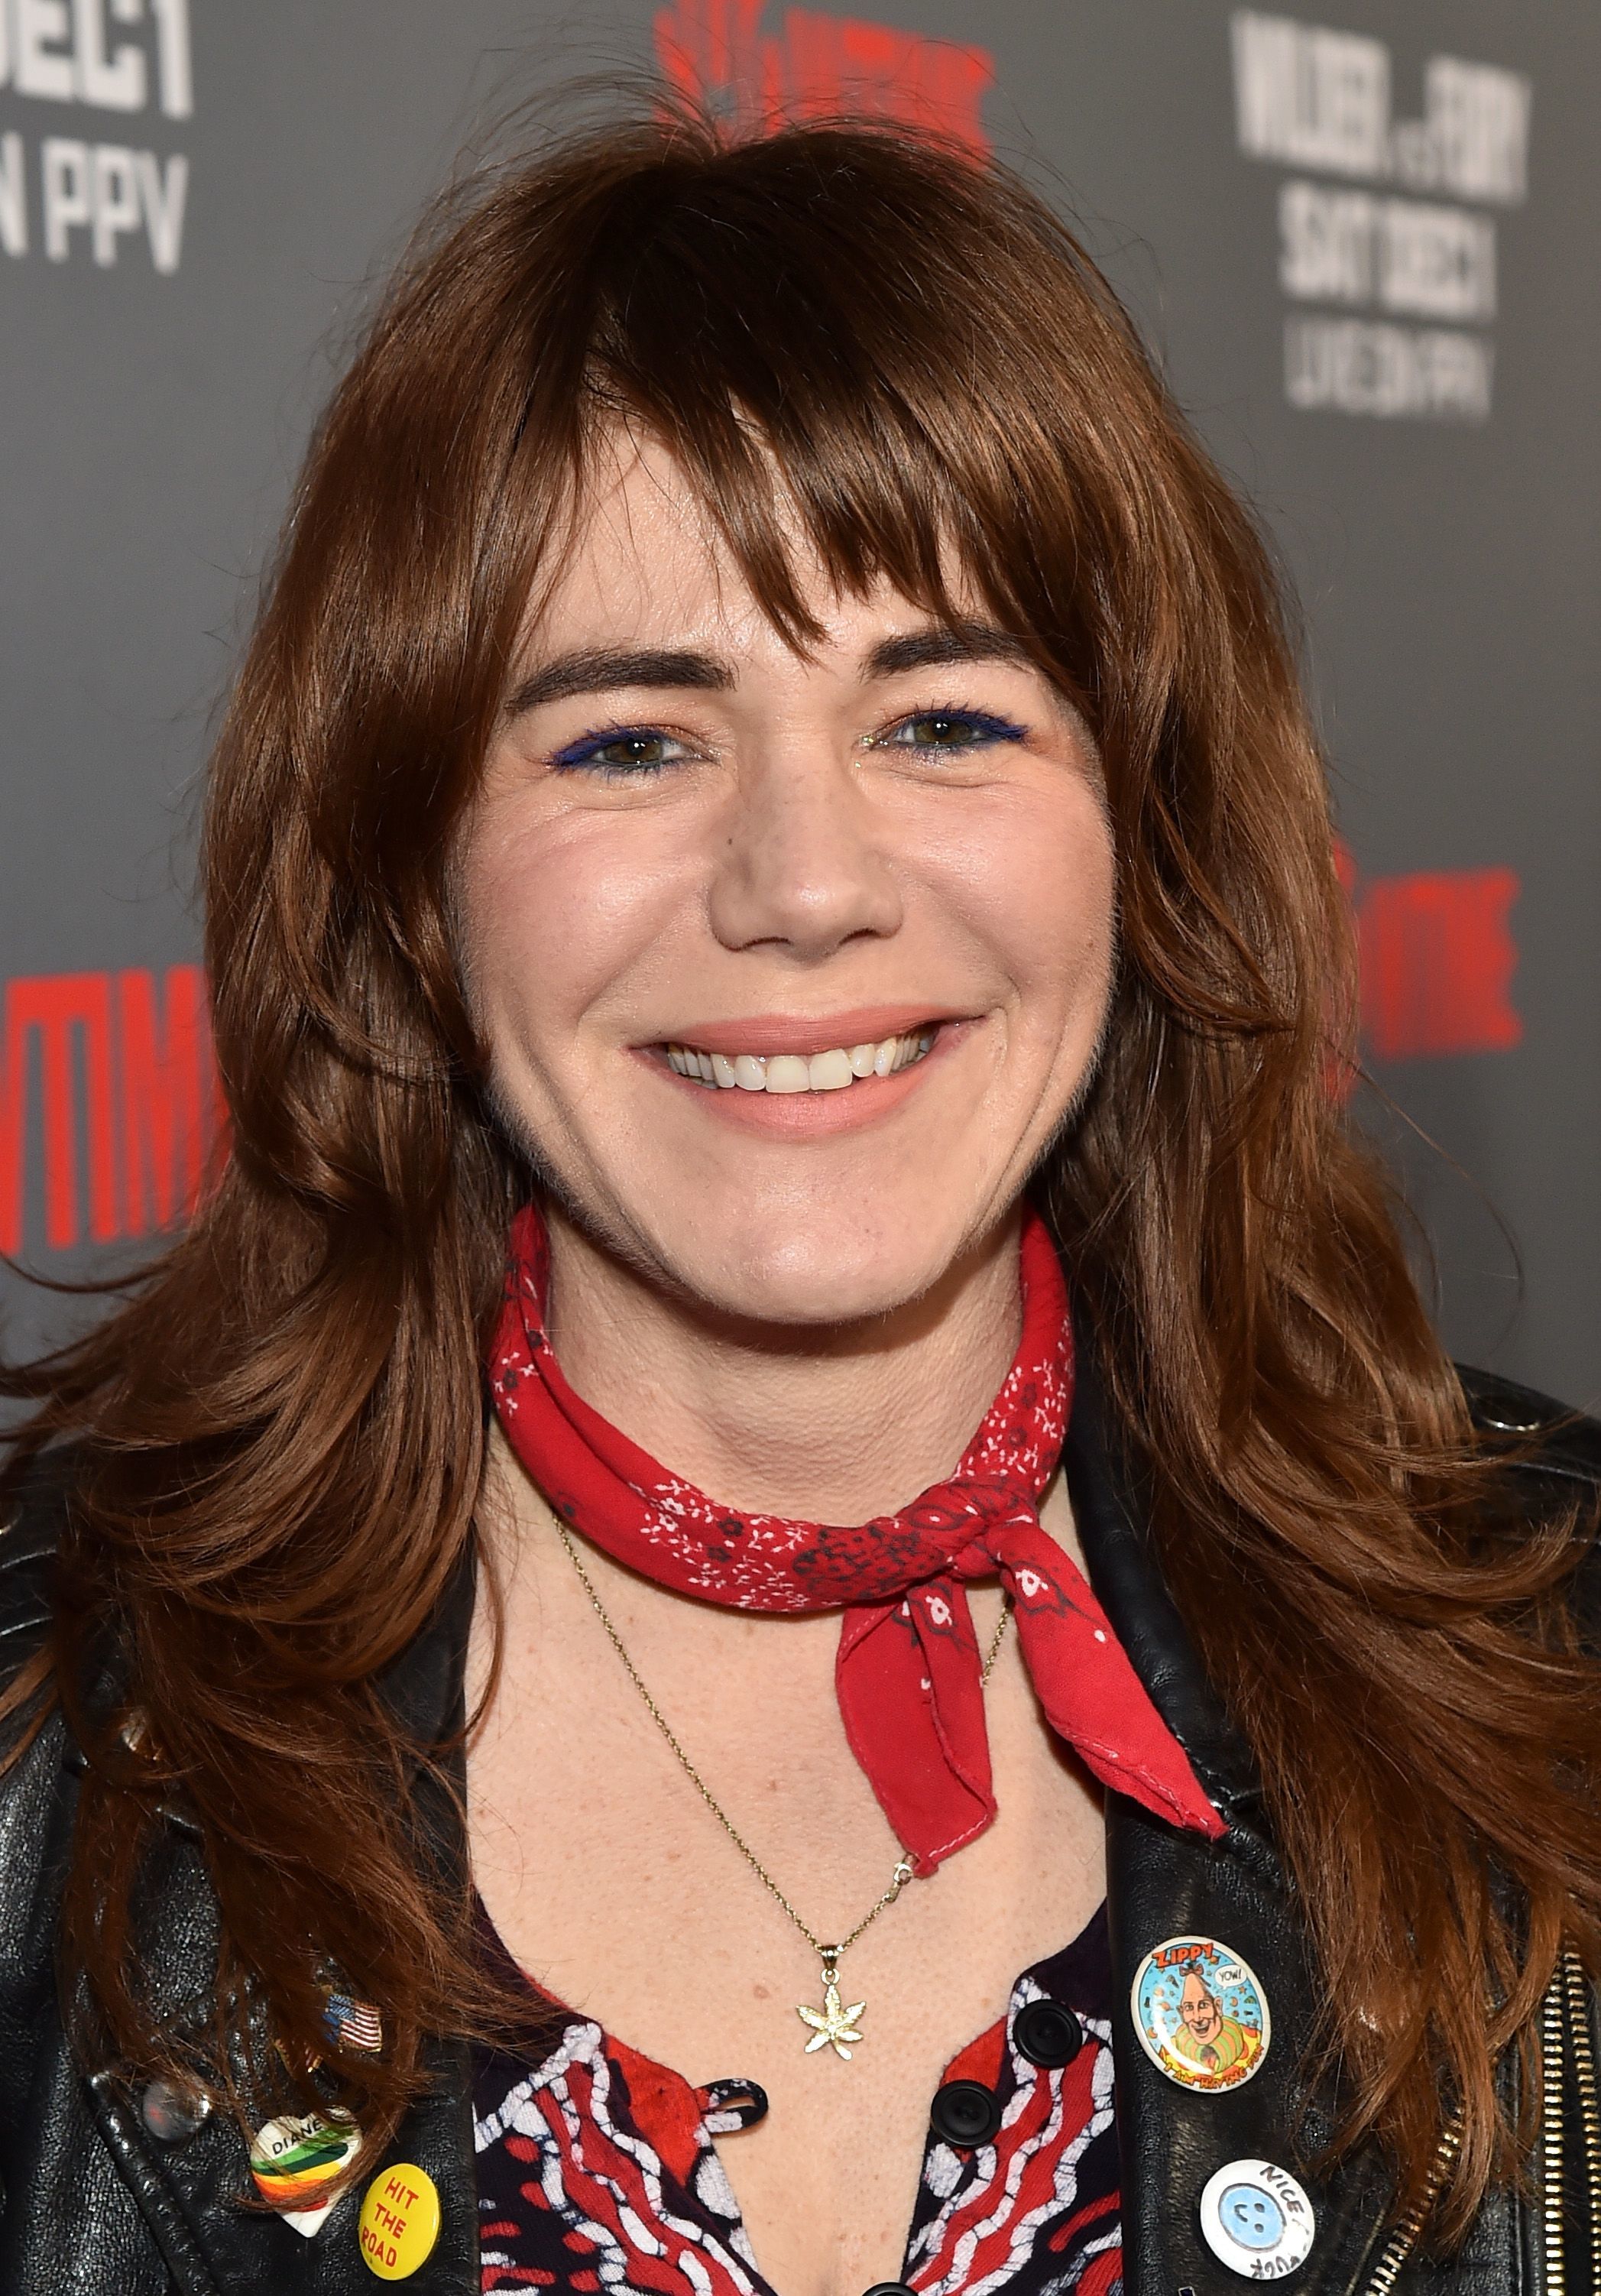 <p>Jenny Lewis hasn't appeared on screen since 2001, though she voiced a small role in "Bolt" in 2008. (She also wrote a song for the soundtrack.) The former child star, who once romanced Jake Gyllenhaal and David Faustino, has been focusing on her music career since the '90s. She sang lead vocals for indie rock group Rilo Kiley, which she formed with then-boyfriend Blake Sennett in 1998. The group took a hiatus when the couple called it quits and then disbanded for good in 2011. In 2010, Jenny teamed up with new boyfriend Johnathan Rice to form musical duo Jenny and Johnny. She's also released three solo albums including 2014's "The Voyager." In 2016, she teamed up with Erika Forster and Tennessee Thomas to form the trio Nice As F***. Jenny's latest solo album, "Joy'All," is due out in 2023. In 2021, she opened for Harry Styles during his "Love on Tour" concert trek.</p>